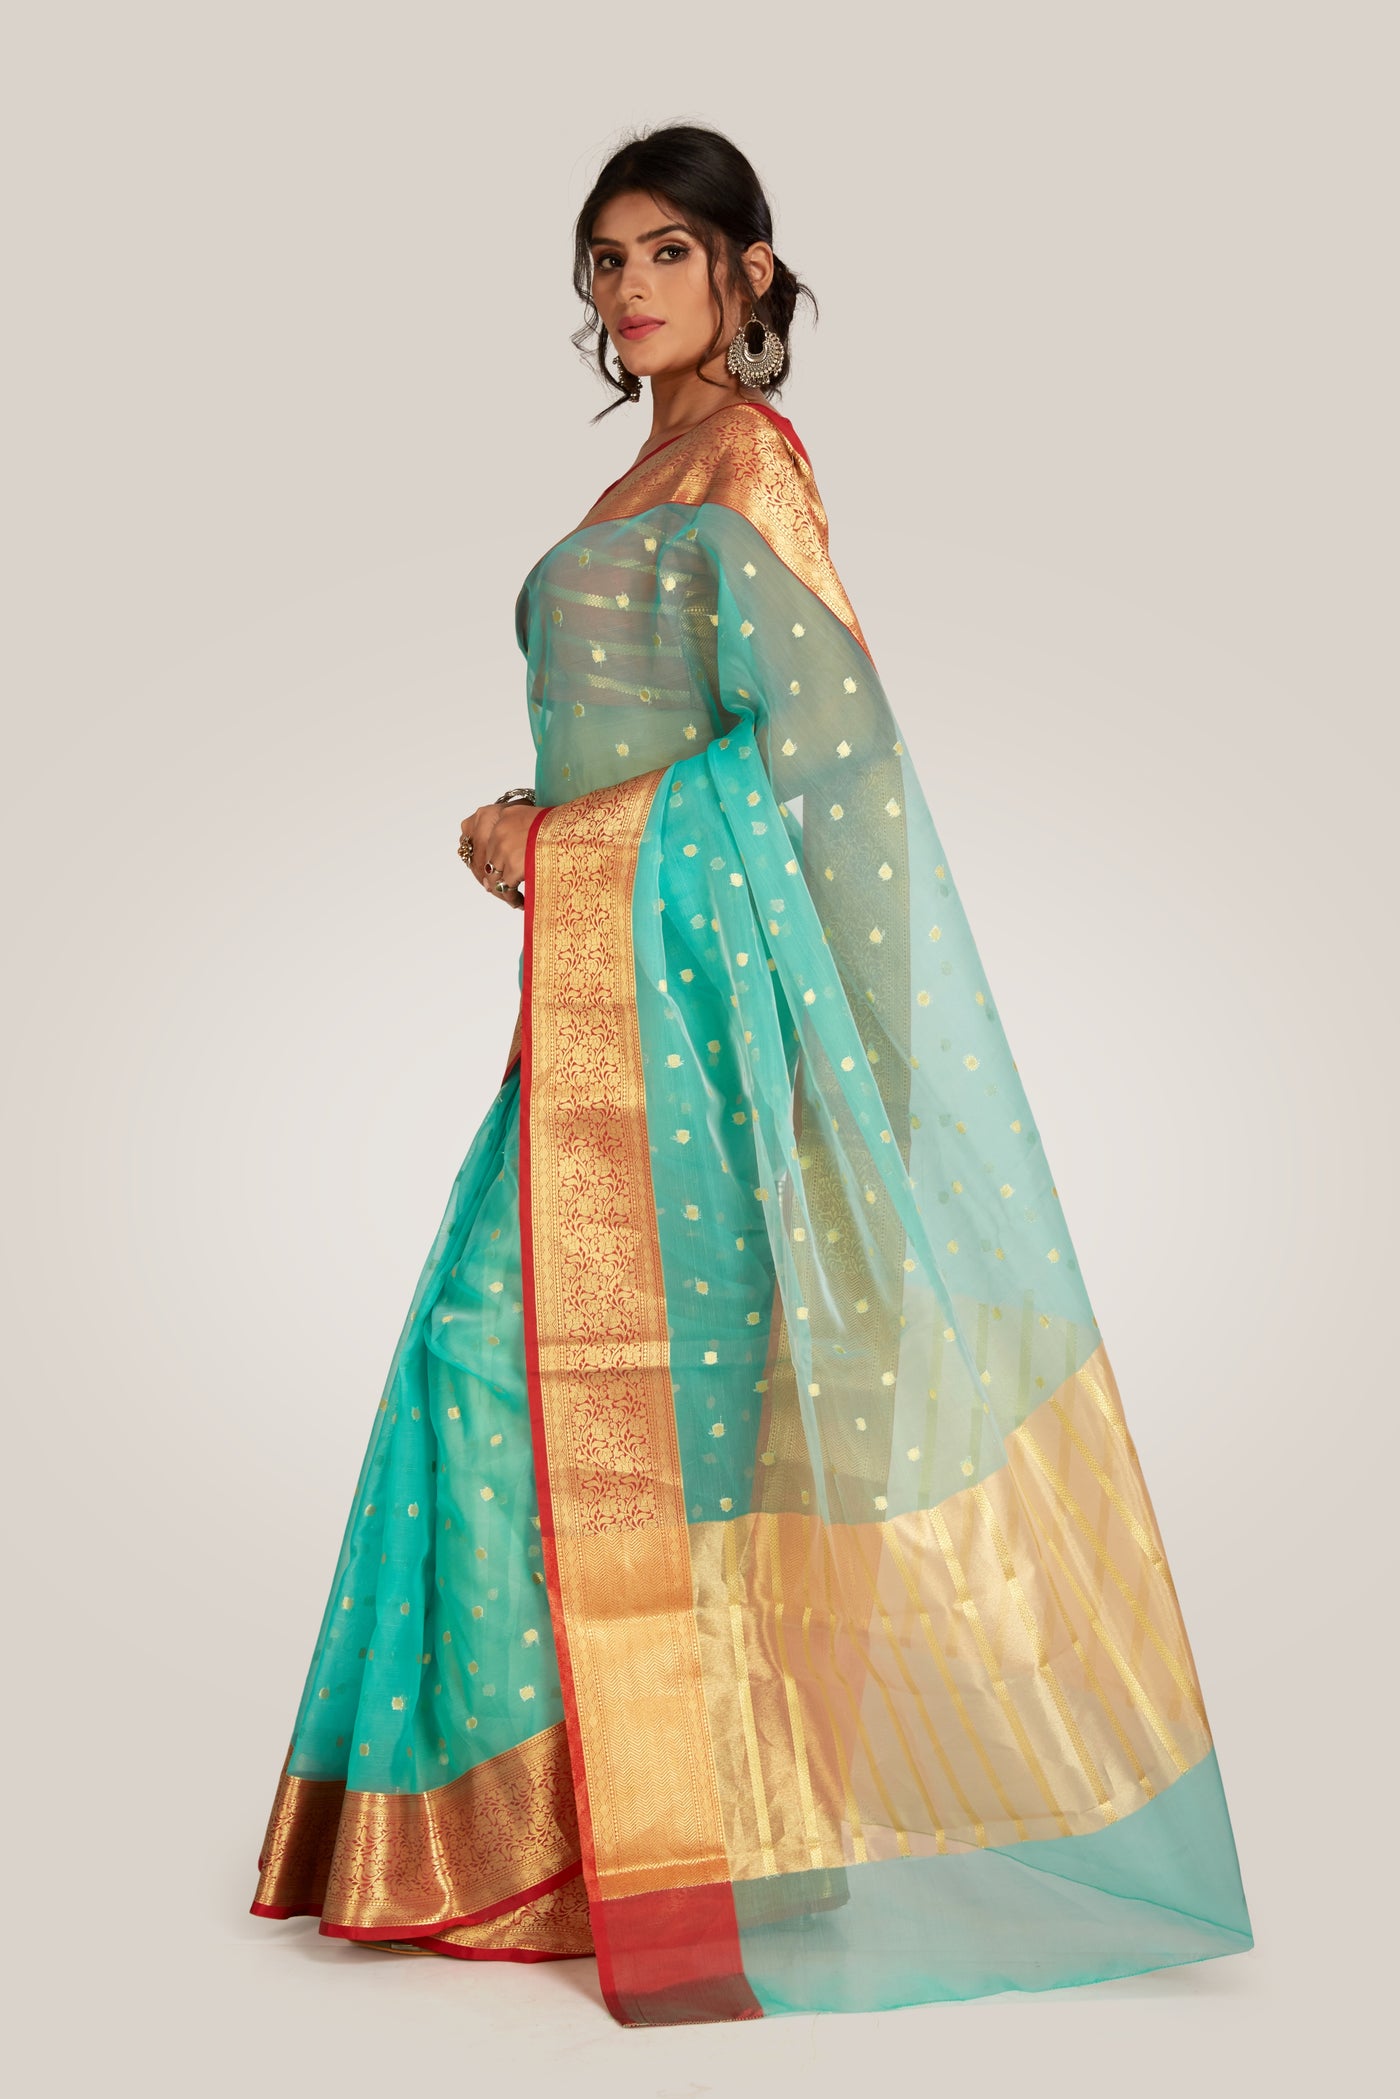 Sea Green Silk Saree - Indian Clothing in Denver, CO, Aurora, CO, Boulder, CO, Fort Collins, CO, Colorado Springs, CO, Parker, CO, Highlands Ranch, CO, Cherry Creek, CO, Centennial, CO, and Longmont, CO. Nationwide shipping USA - India Fashion X